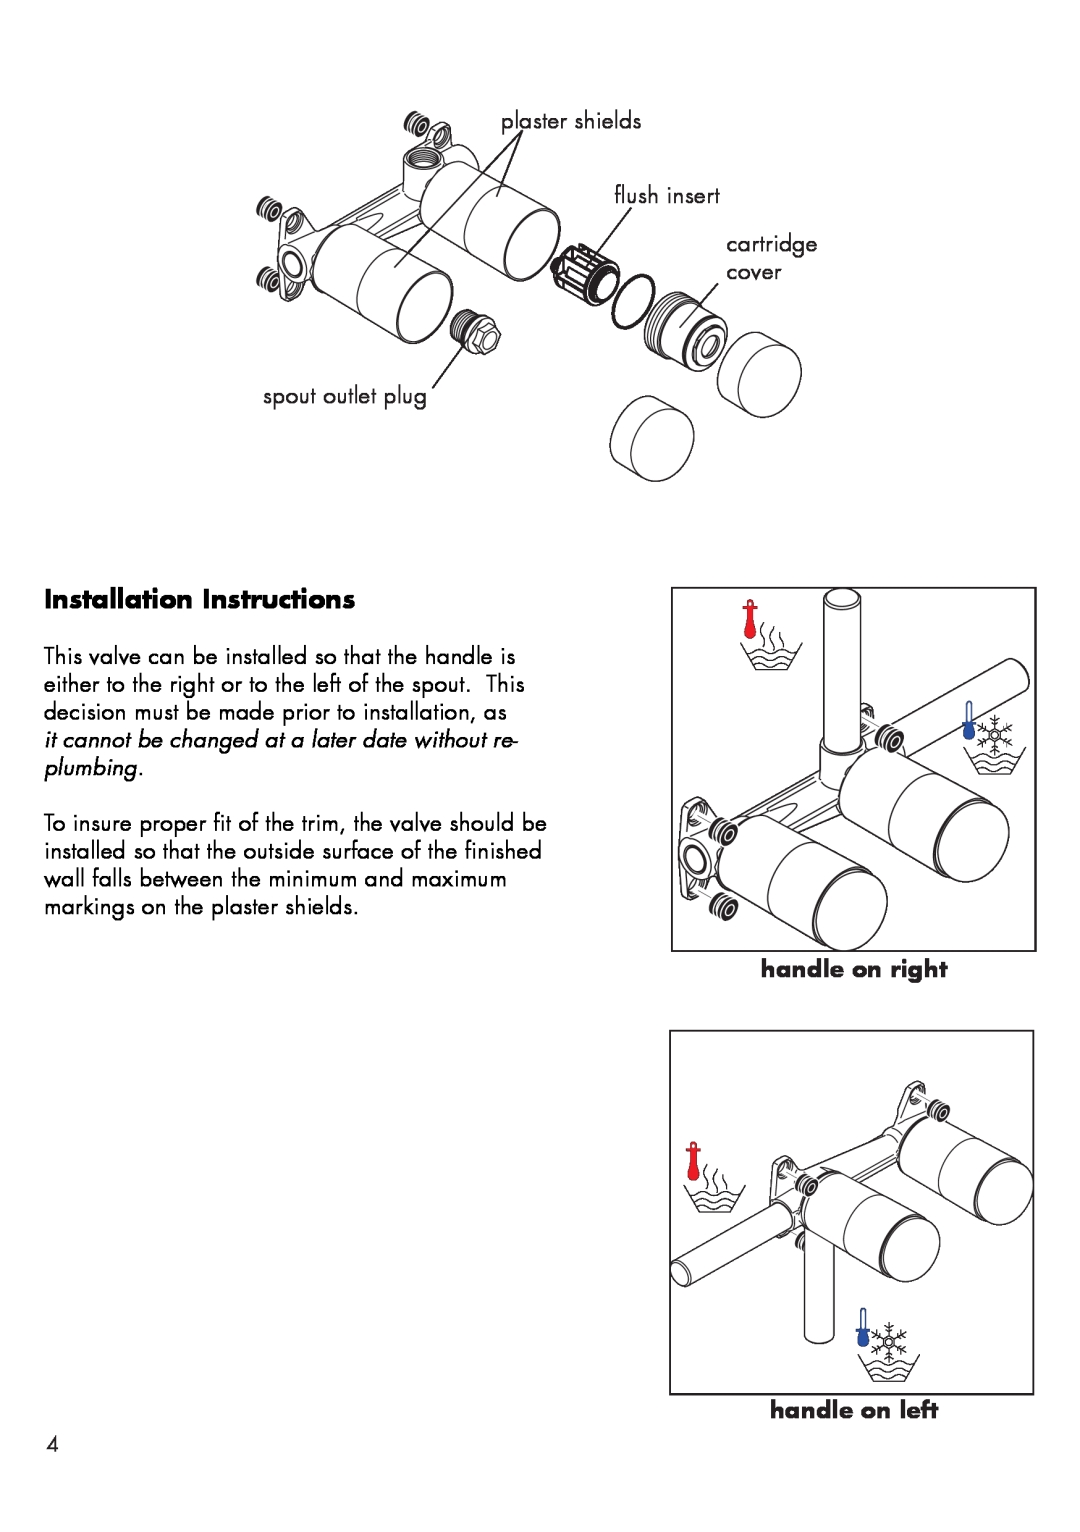 Axor 38111181 installation instructions Installation Instructions, handle on right, handle on left 